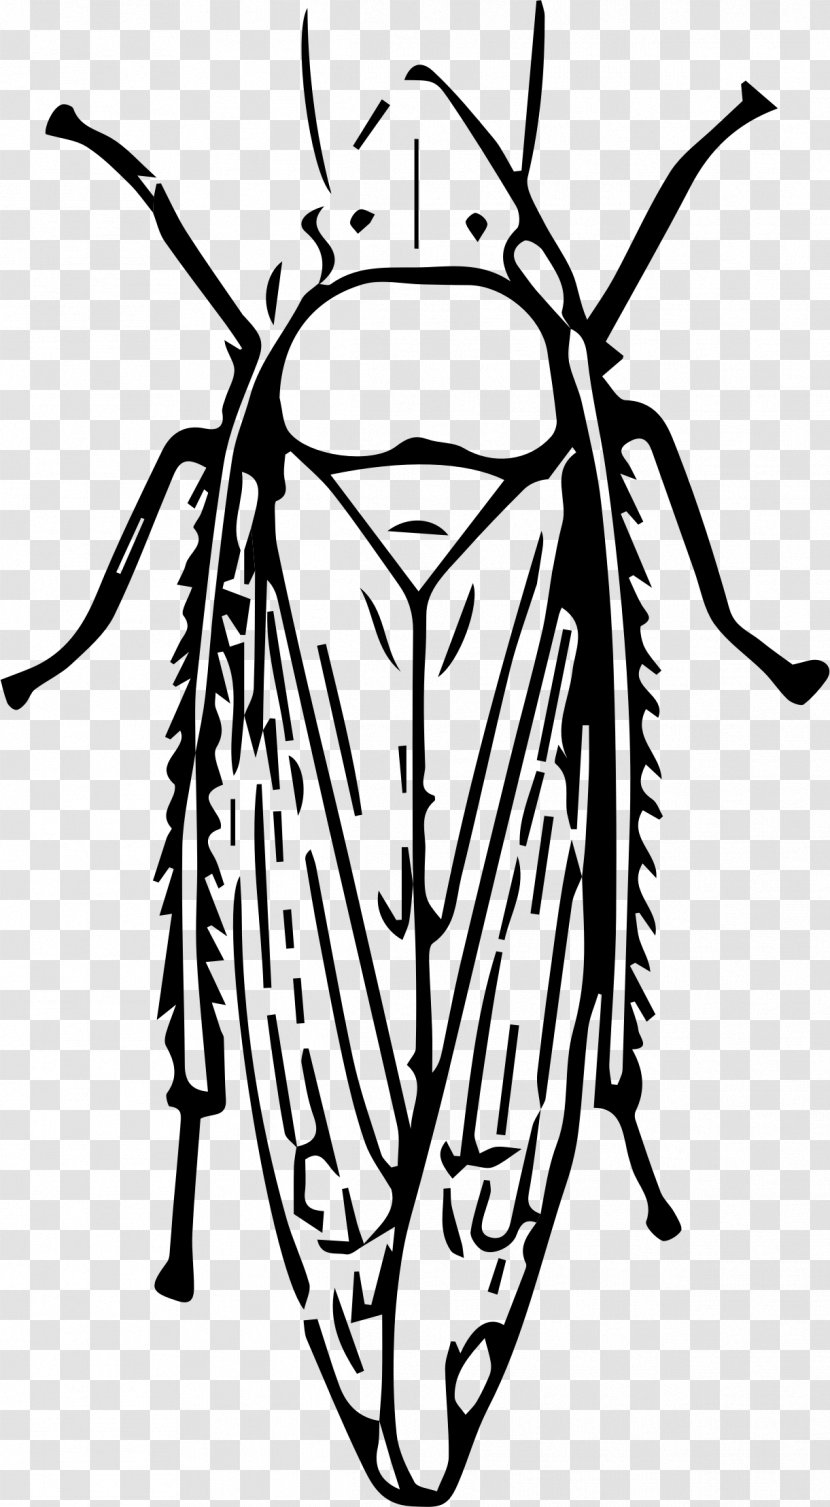 Insect Leafhopper Clip Art - Drawing - Sterilized Viruses Transparent PNG